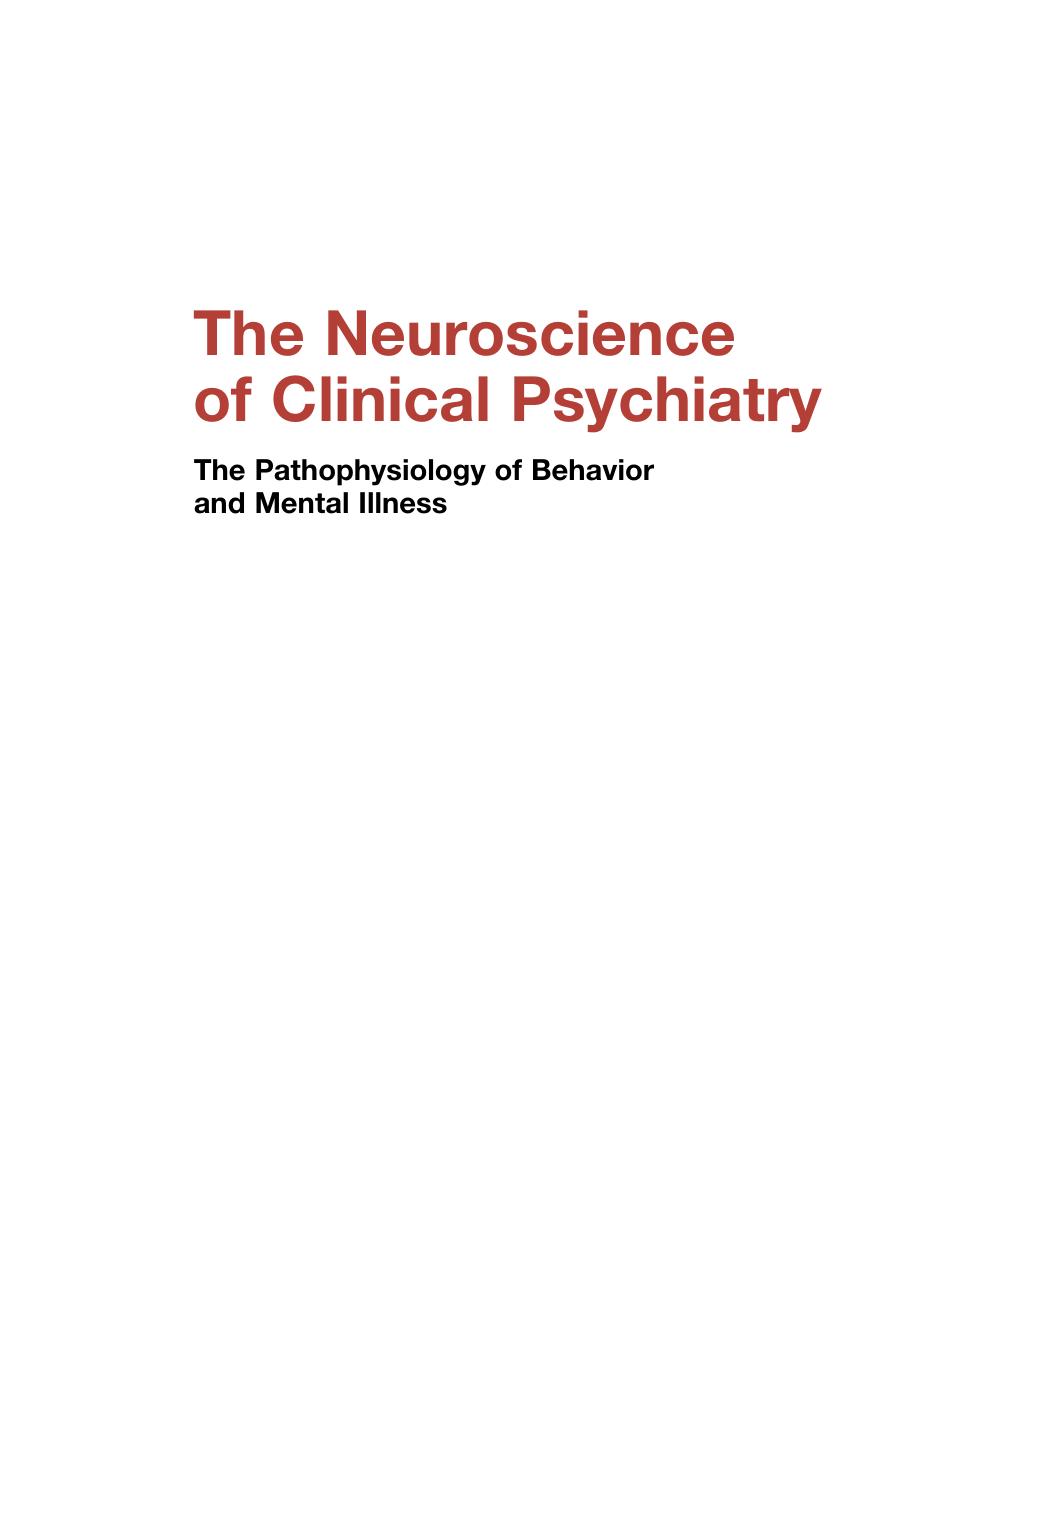 Neuroscience of Clinical Psychiatry : The Pathophysiology of Behavior and Mental Illness